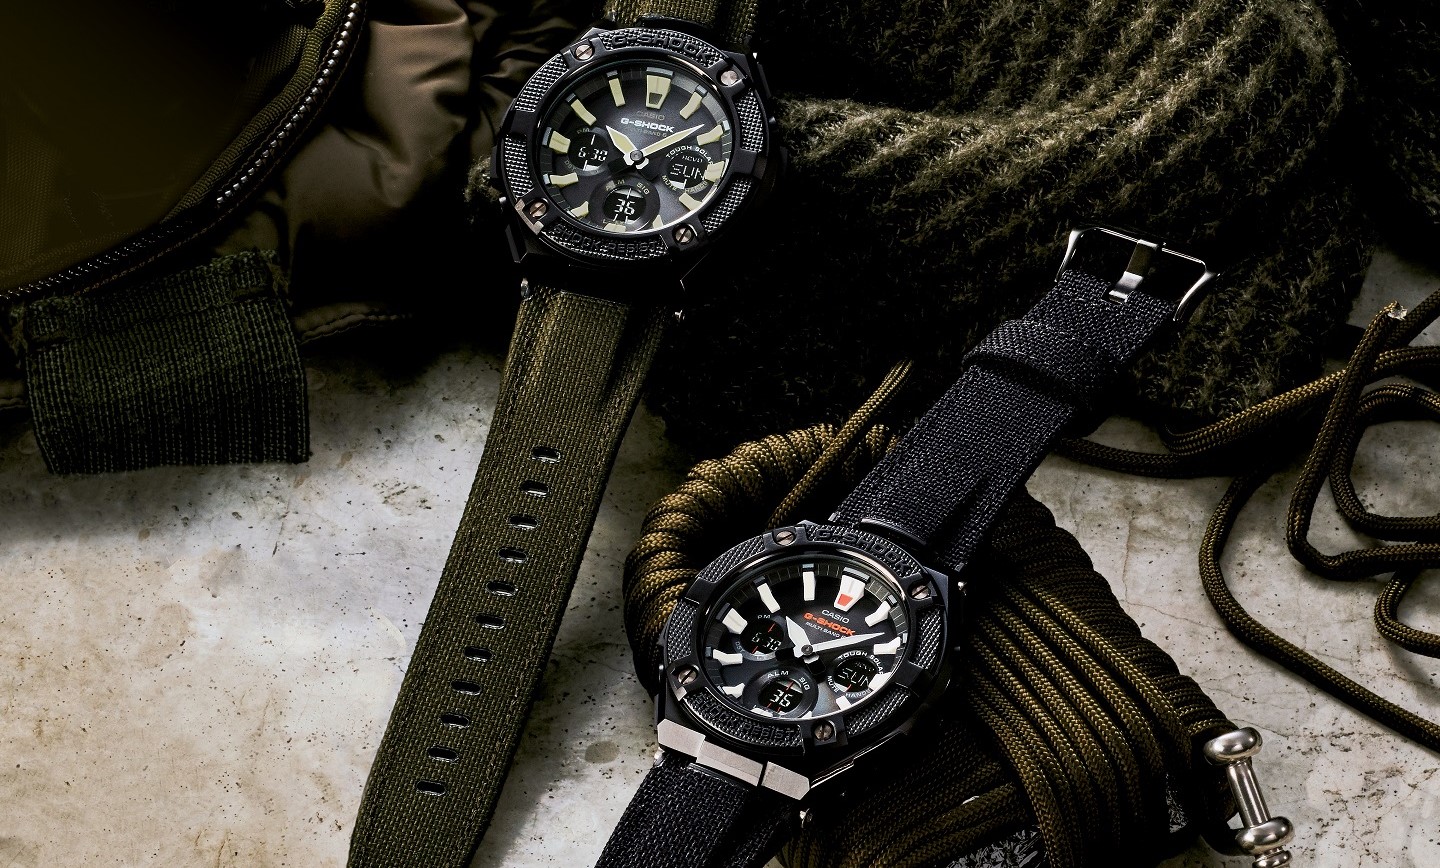 Casio G-Shock GSTS130BC-1A & GSTS130BC-1A3 G-Steel ‘Street Utility’ Collection Watches